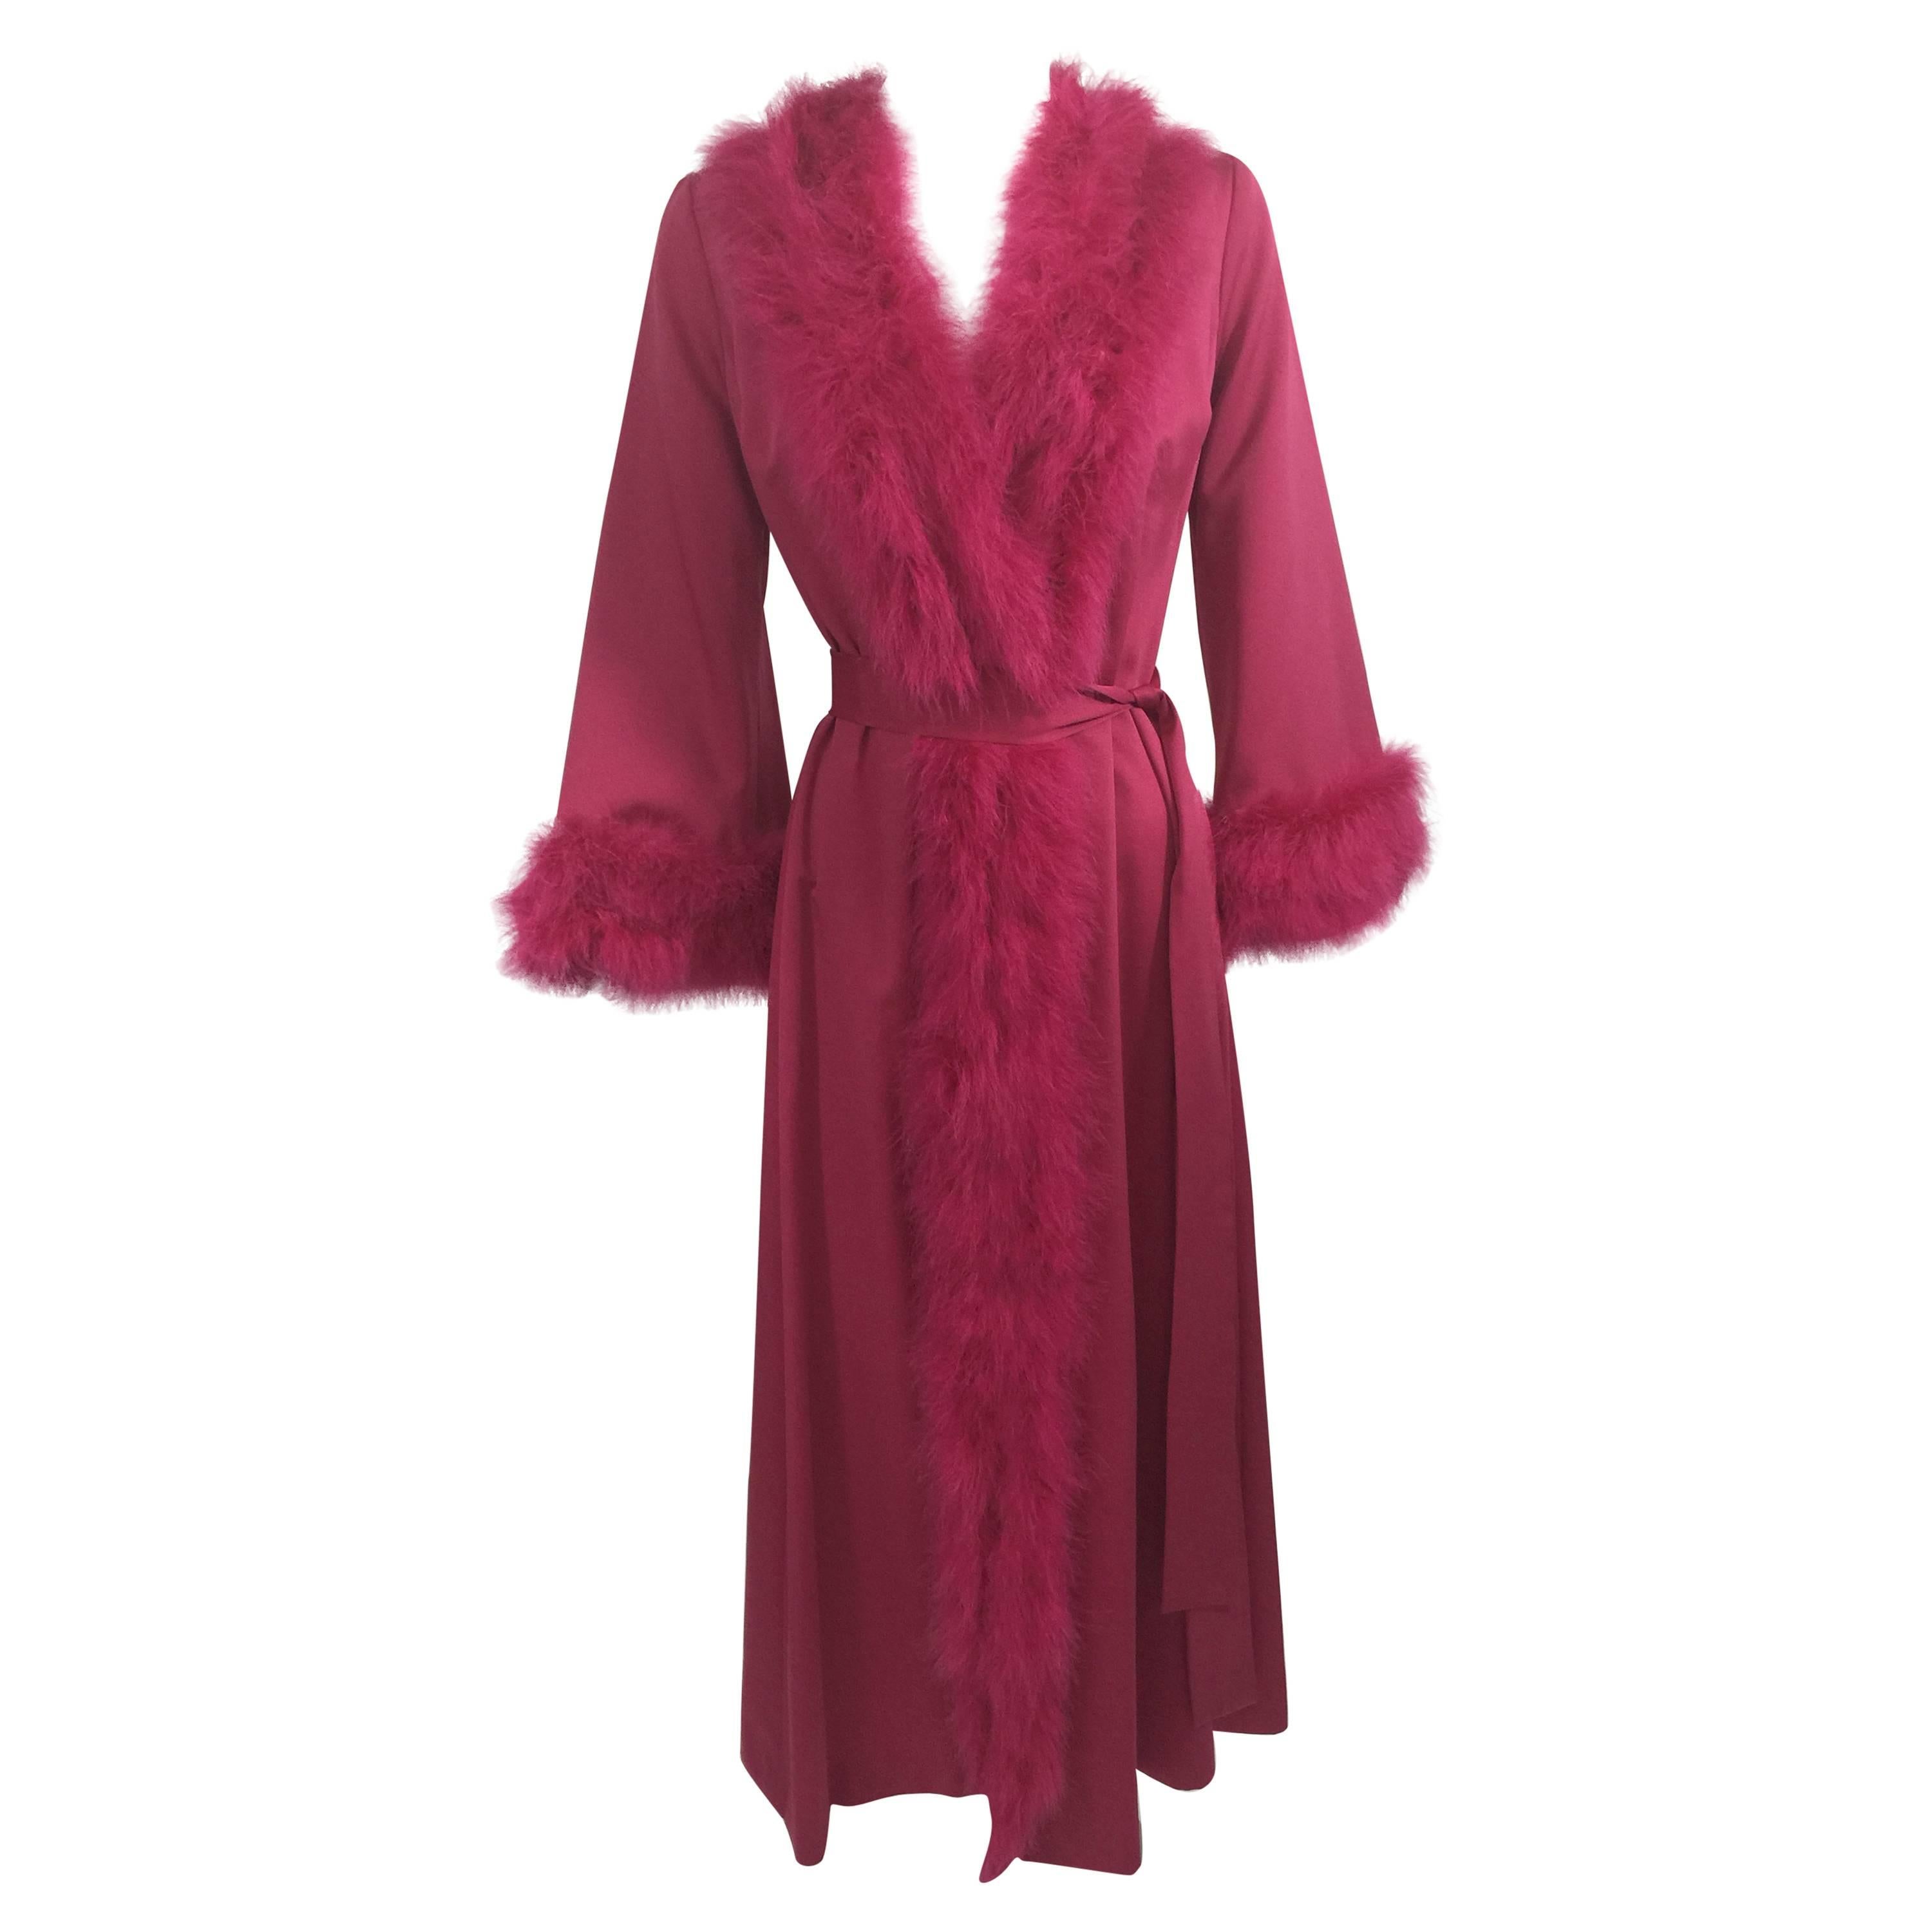 A Magnificent Magenta Marabou Feather Trimmed Caftan & Robe Vintage